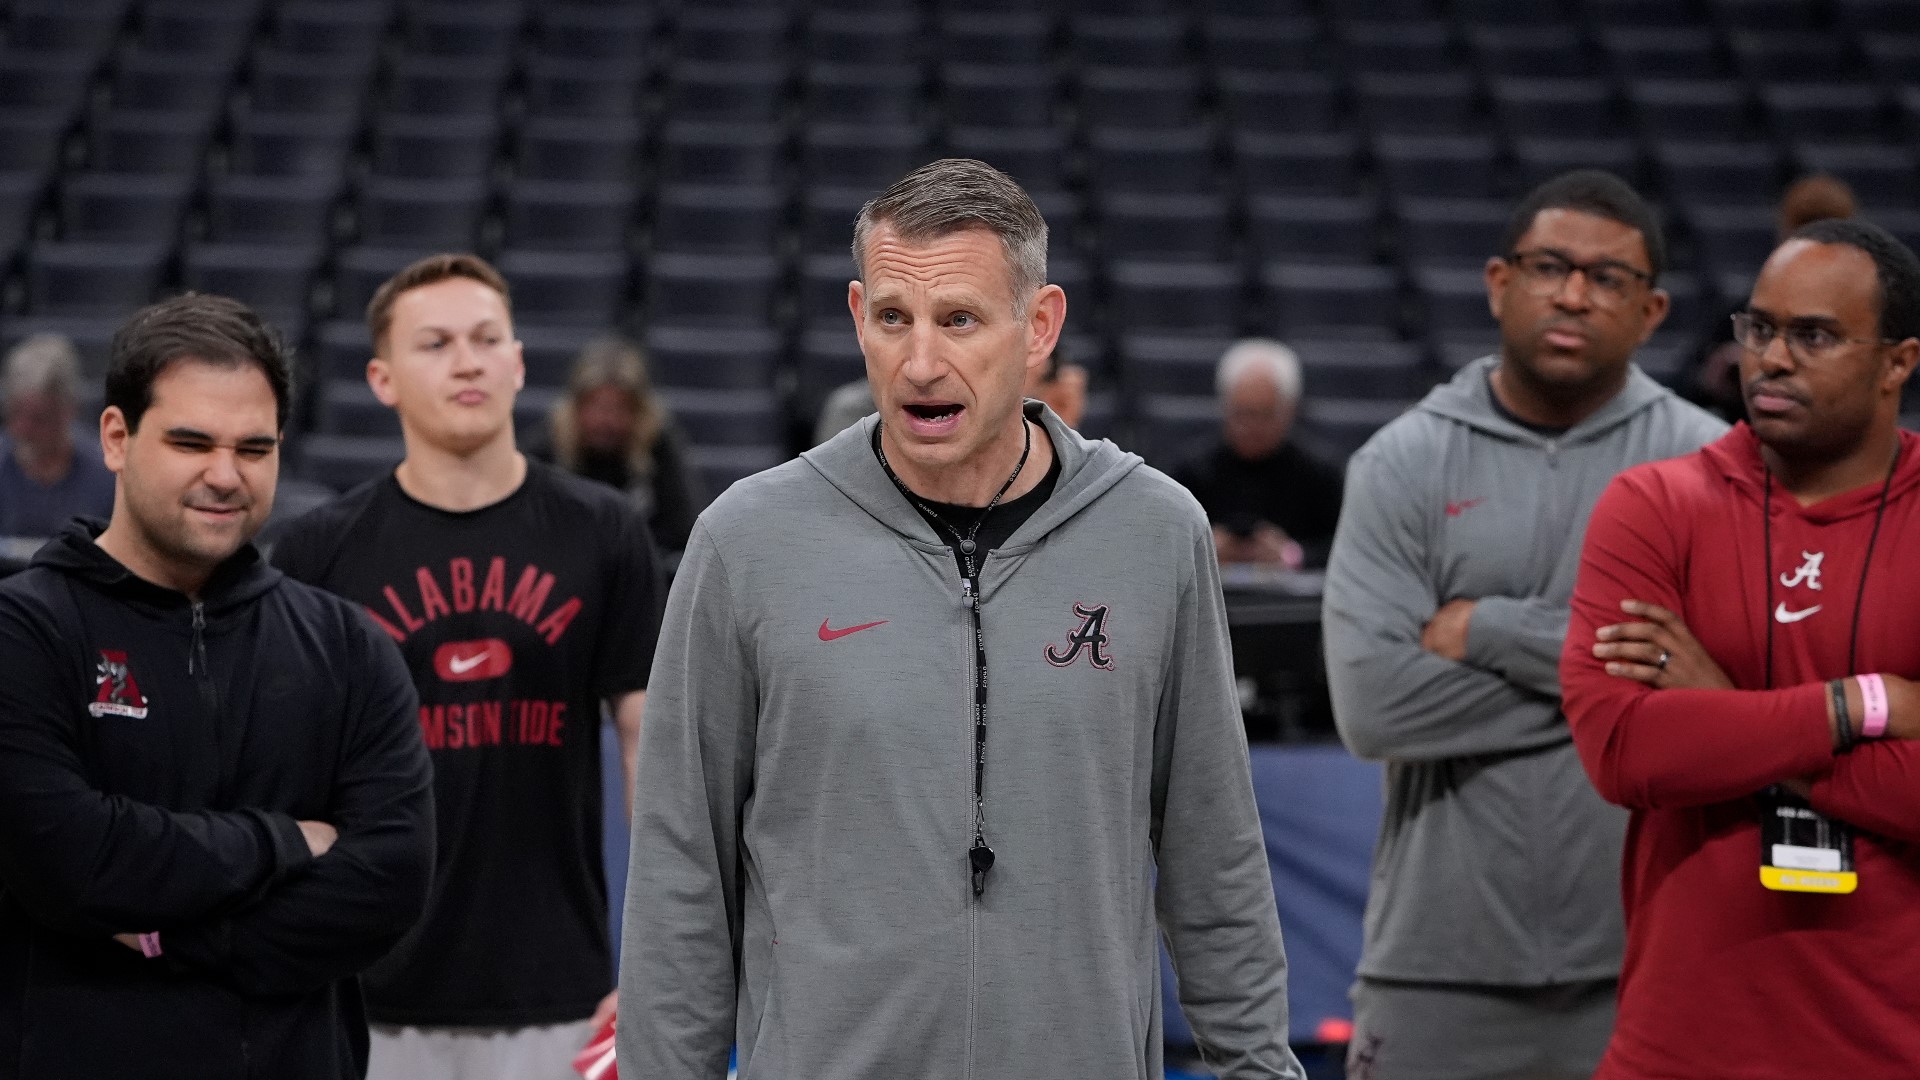 Alabama men’s basketball team has spent the week in Los Angeles as it continues preparing for its NCAA Tournament Sweet 16 showdown with No. 1 seed North Carolina